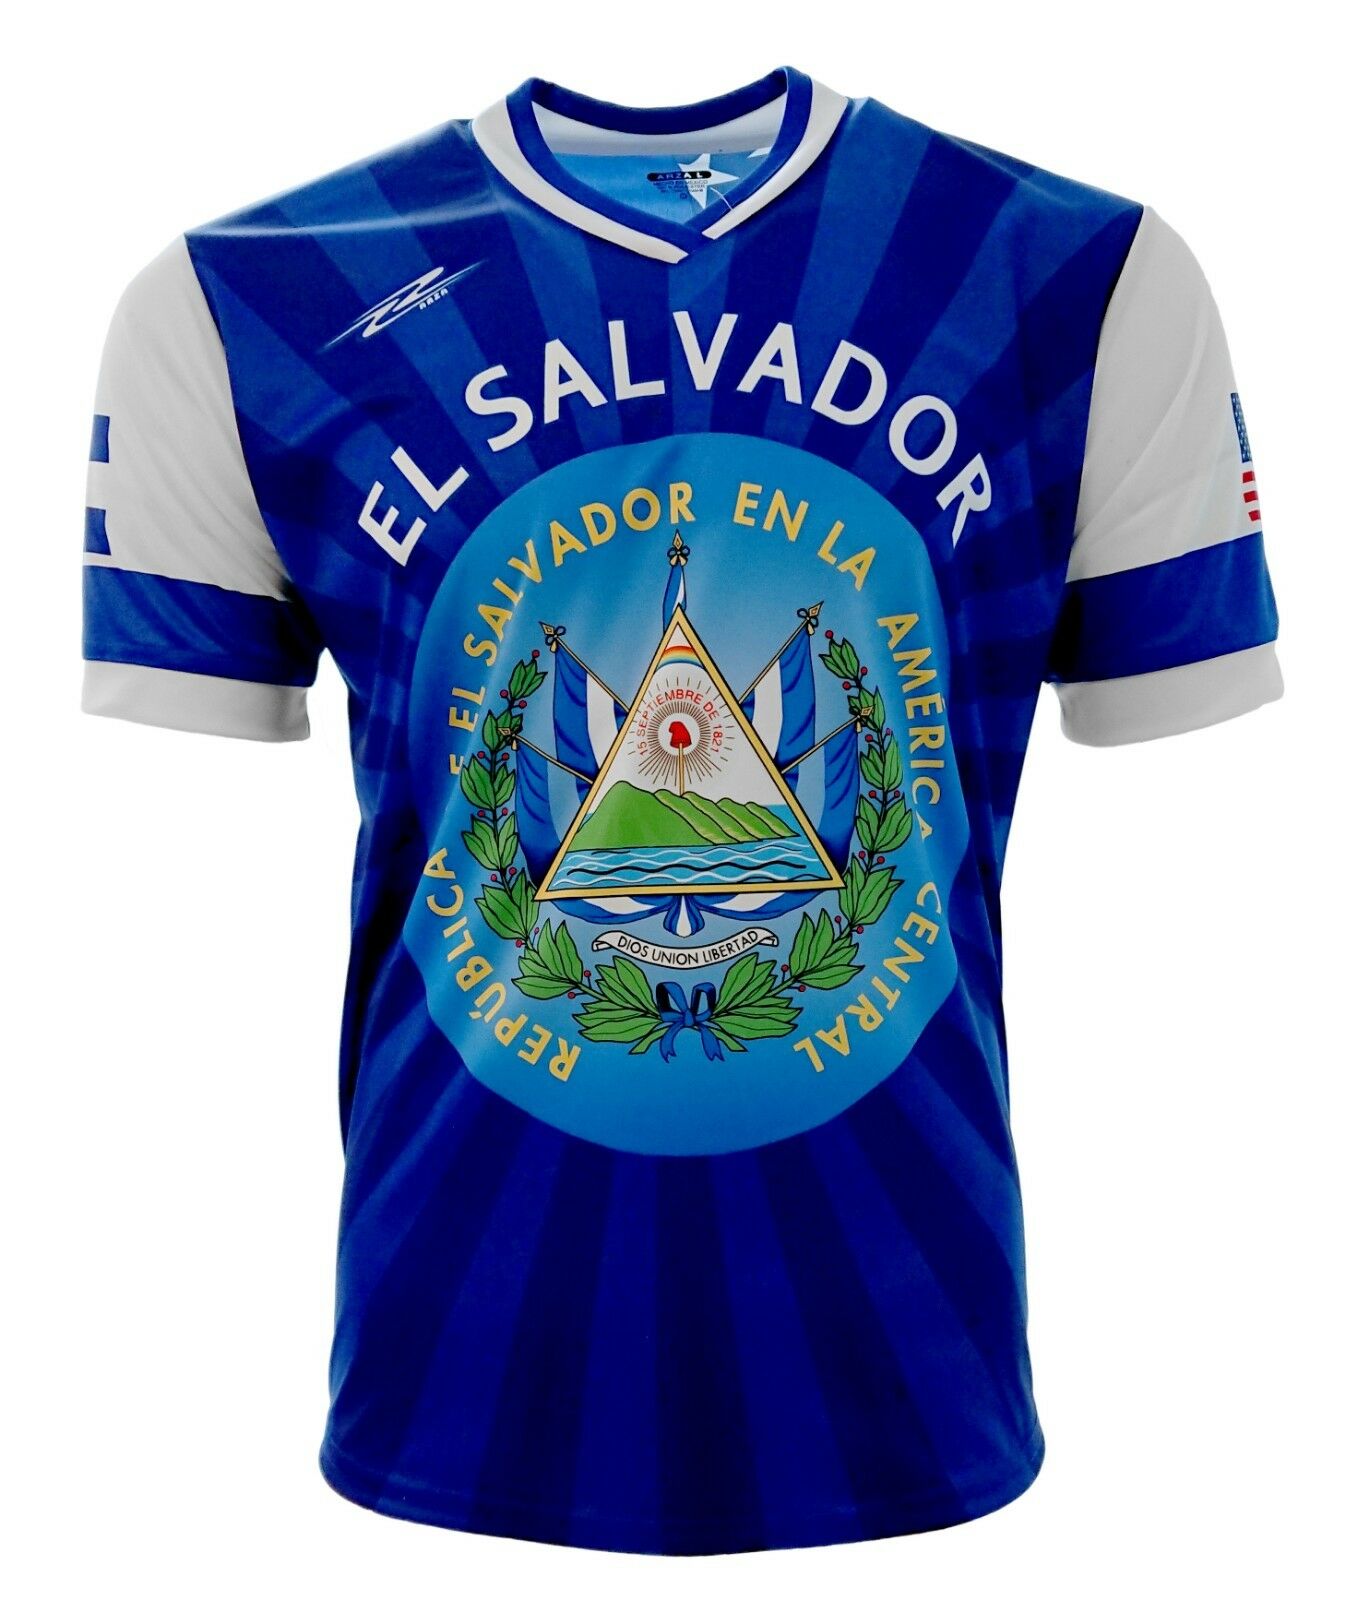 El Salvador And Usa Jersey Arza Design For Kids, Boys And Adults.